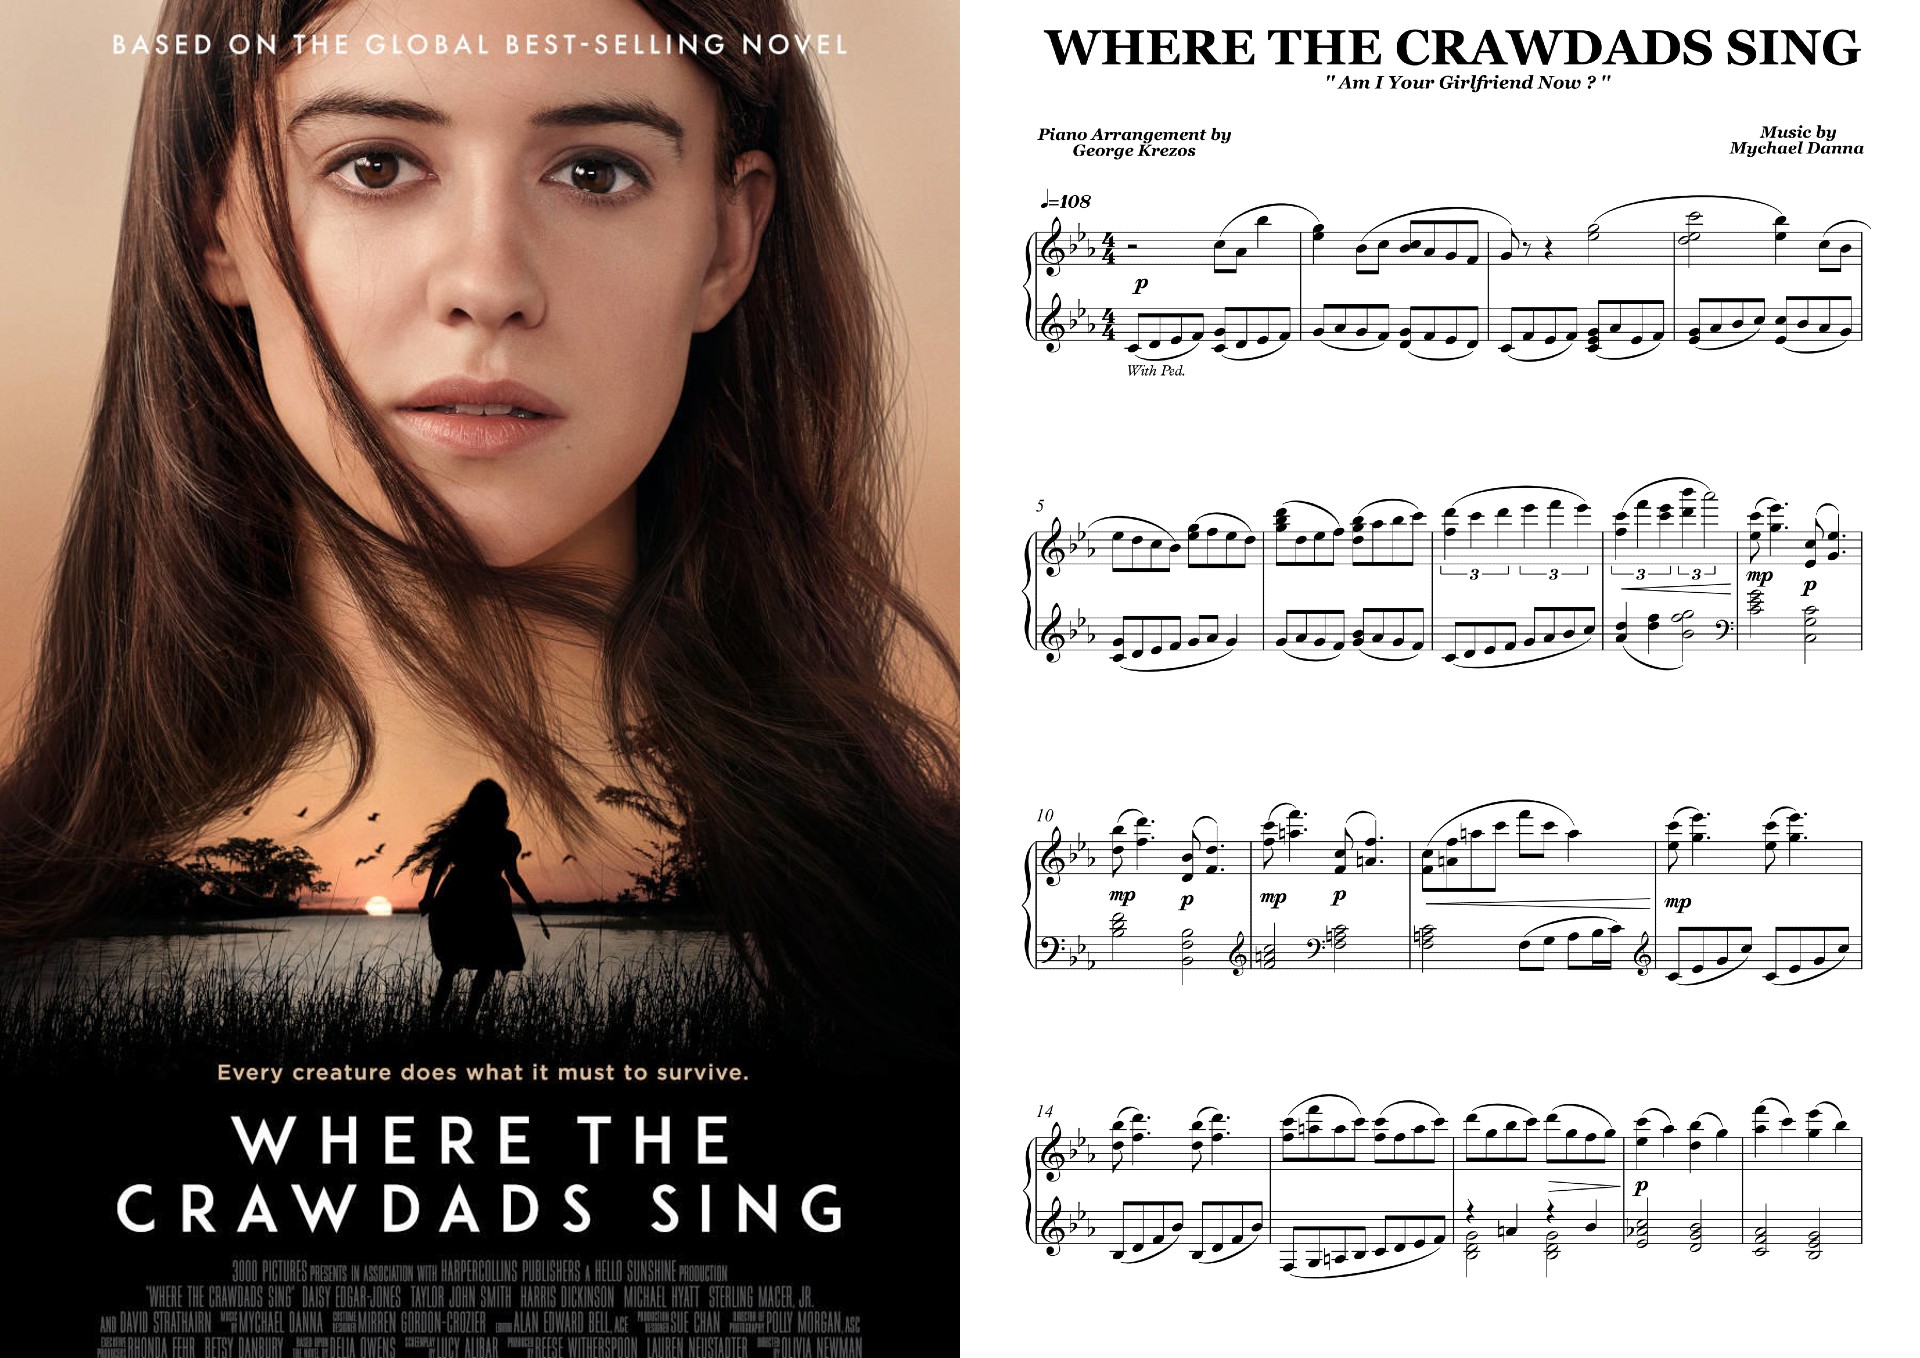 WHERE THE CRAWDADS SING - Am I Your Girlfriend Now.jpg